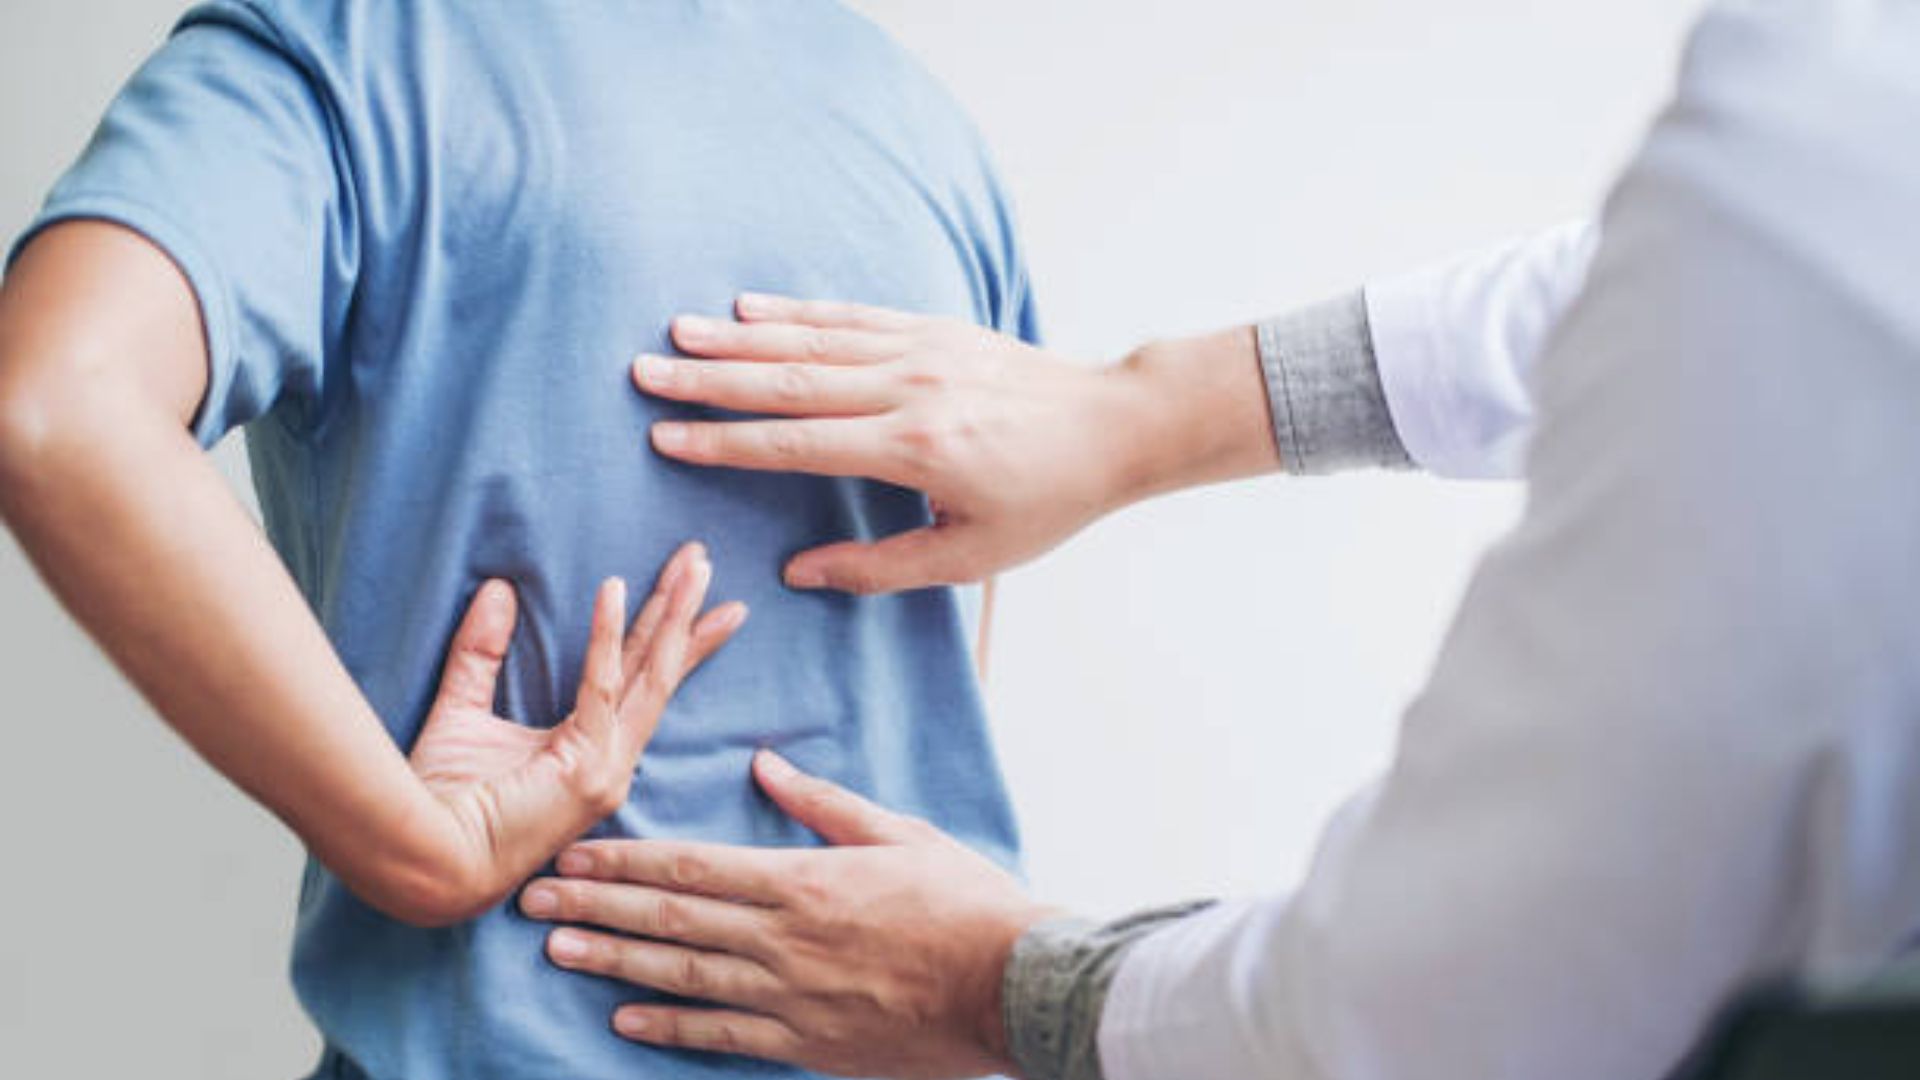 When to See a Doctor for Back Pain